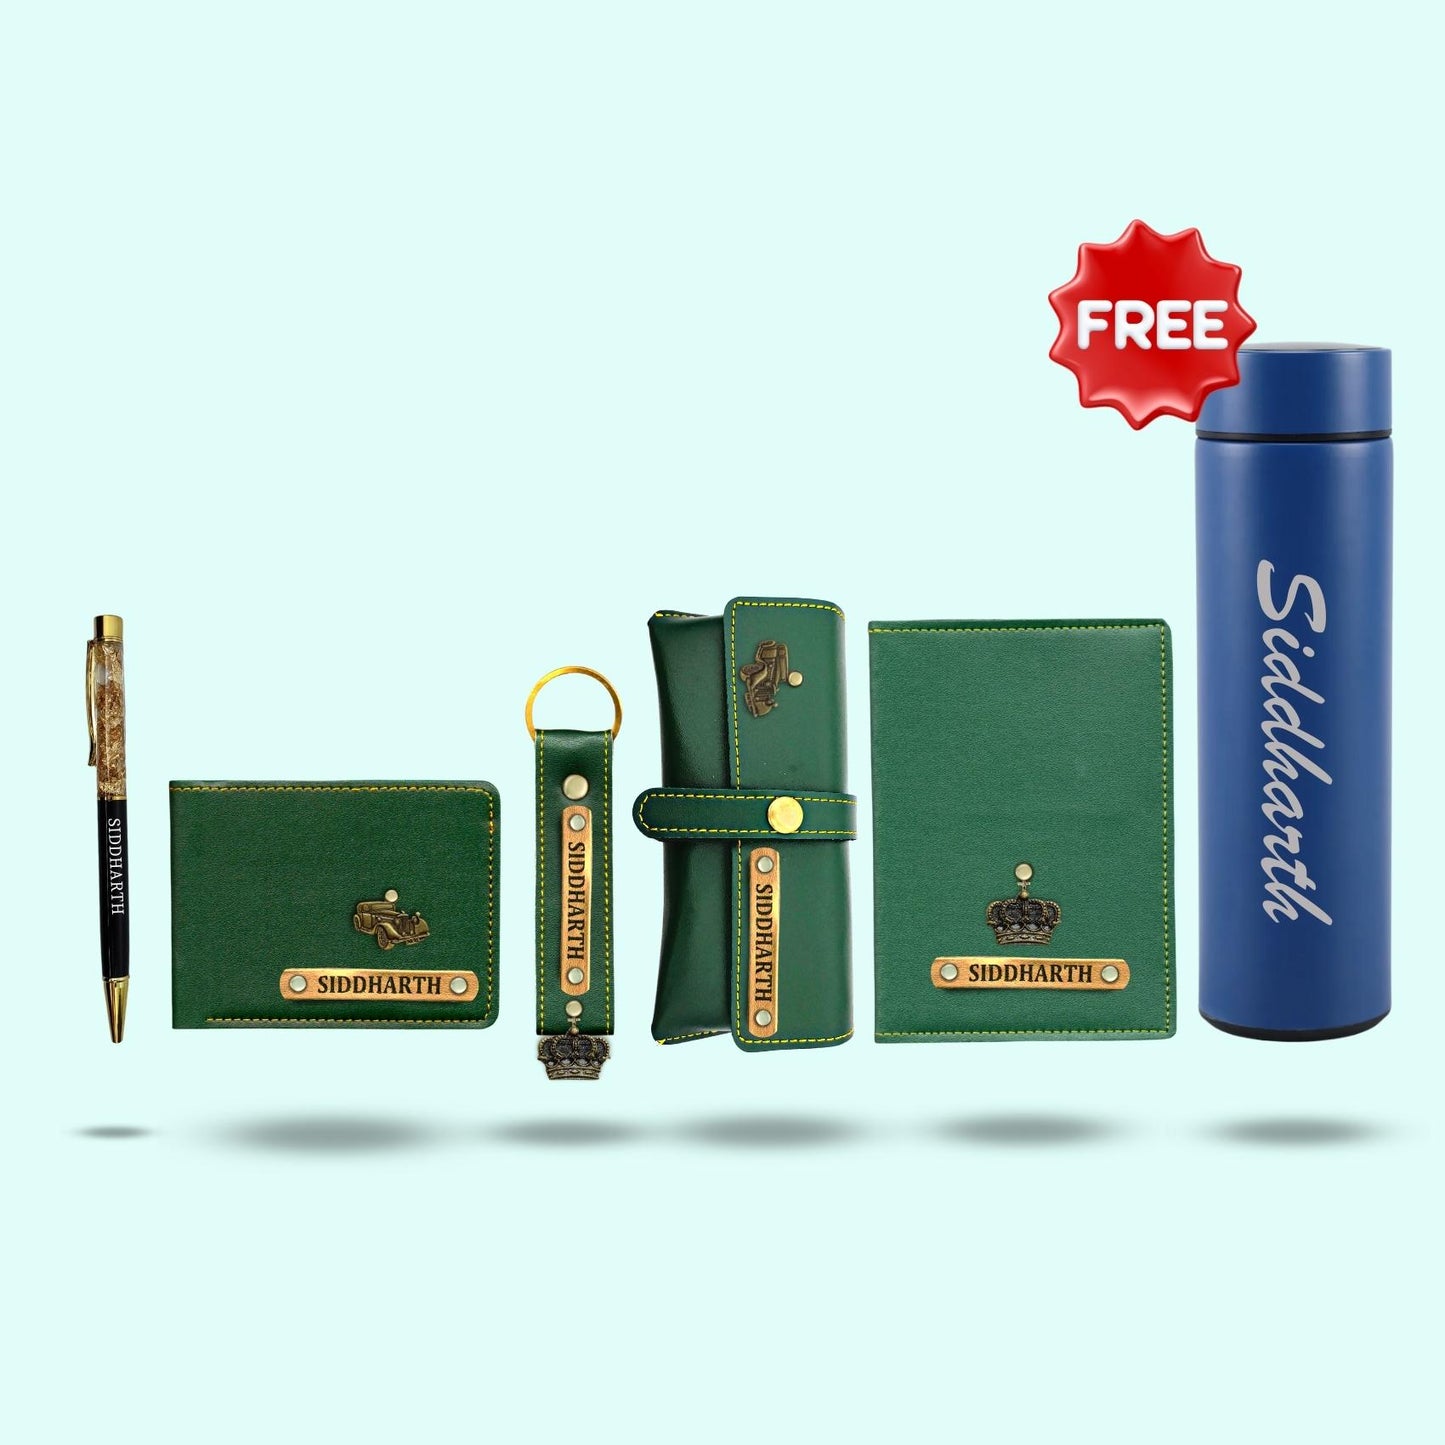 Personalized 6-in-1 Special Gift Hamper for Him - Includes 1 Free Bottle - Green